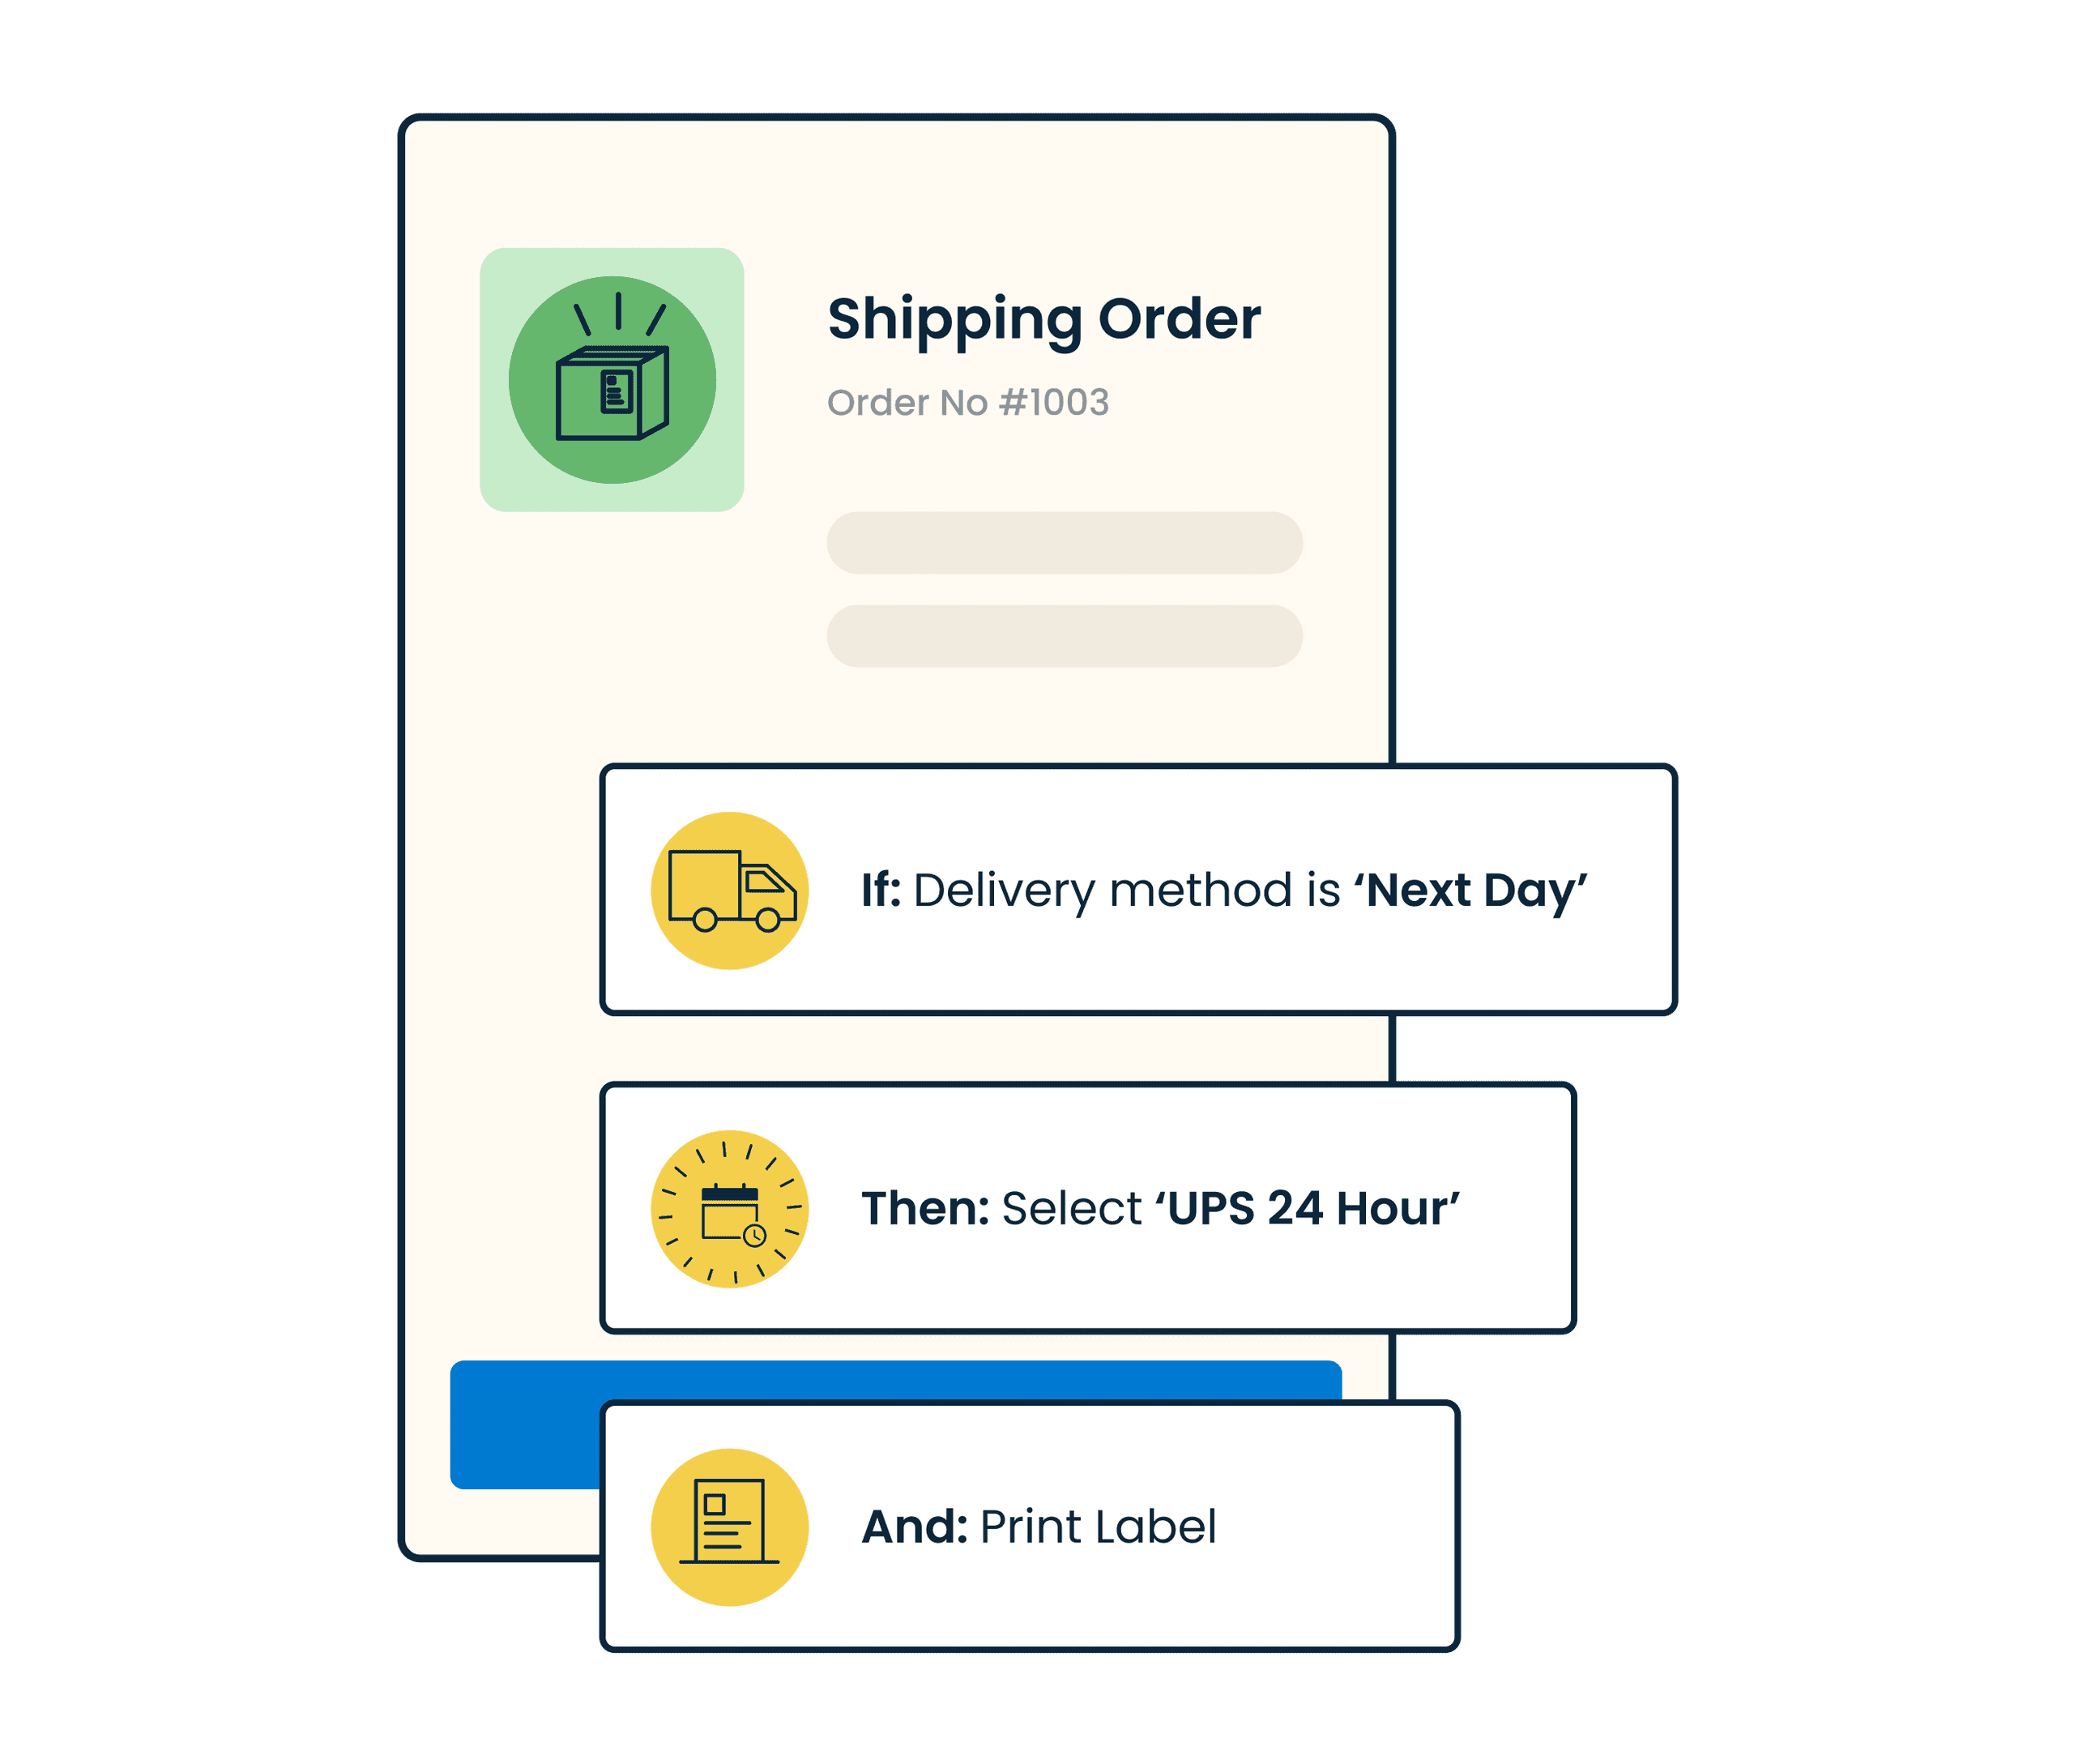 Shipping automation, If: Delivery method is 'Next Day, then: select 'UPS 24 hour', and: Print label.